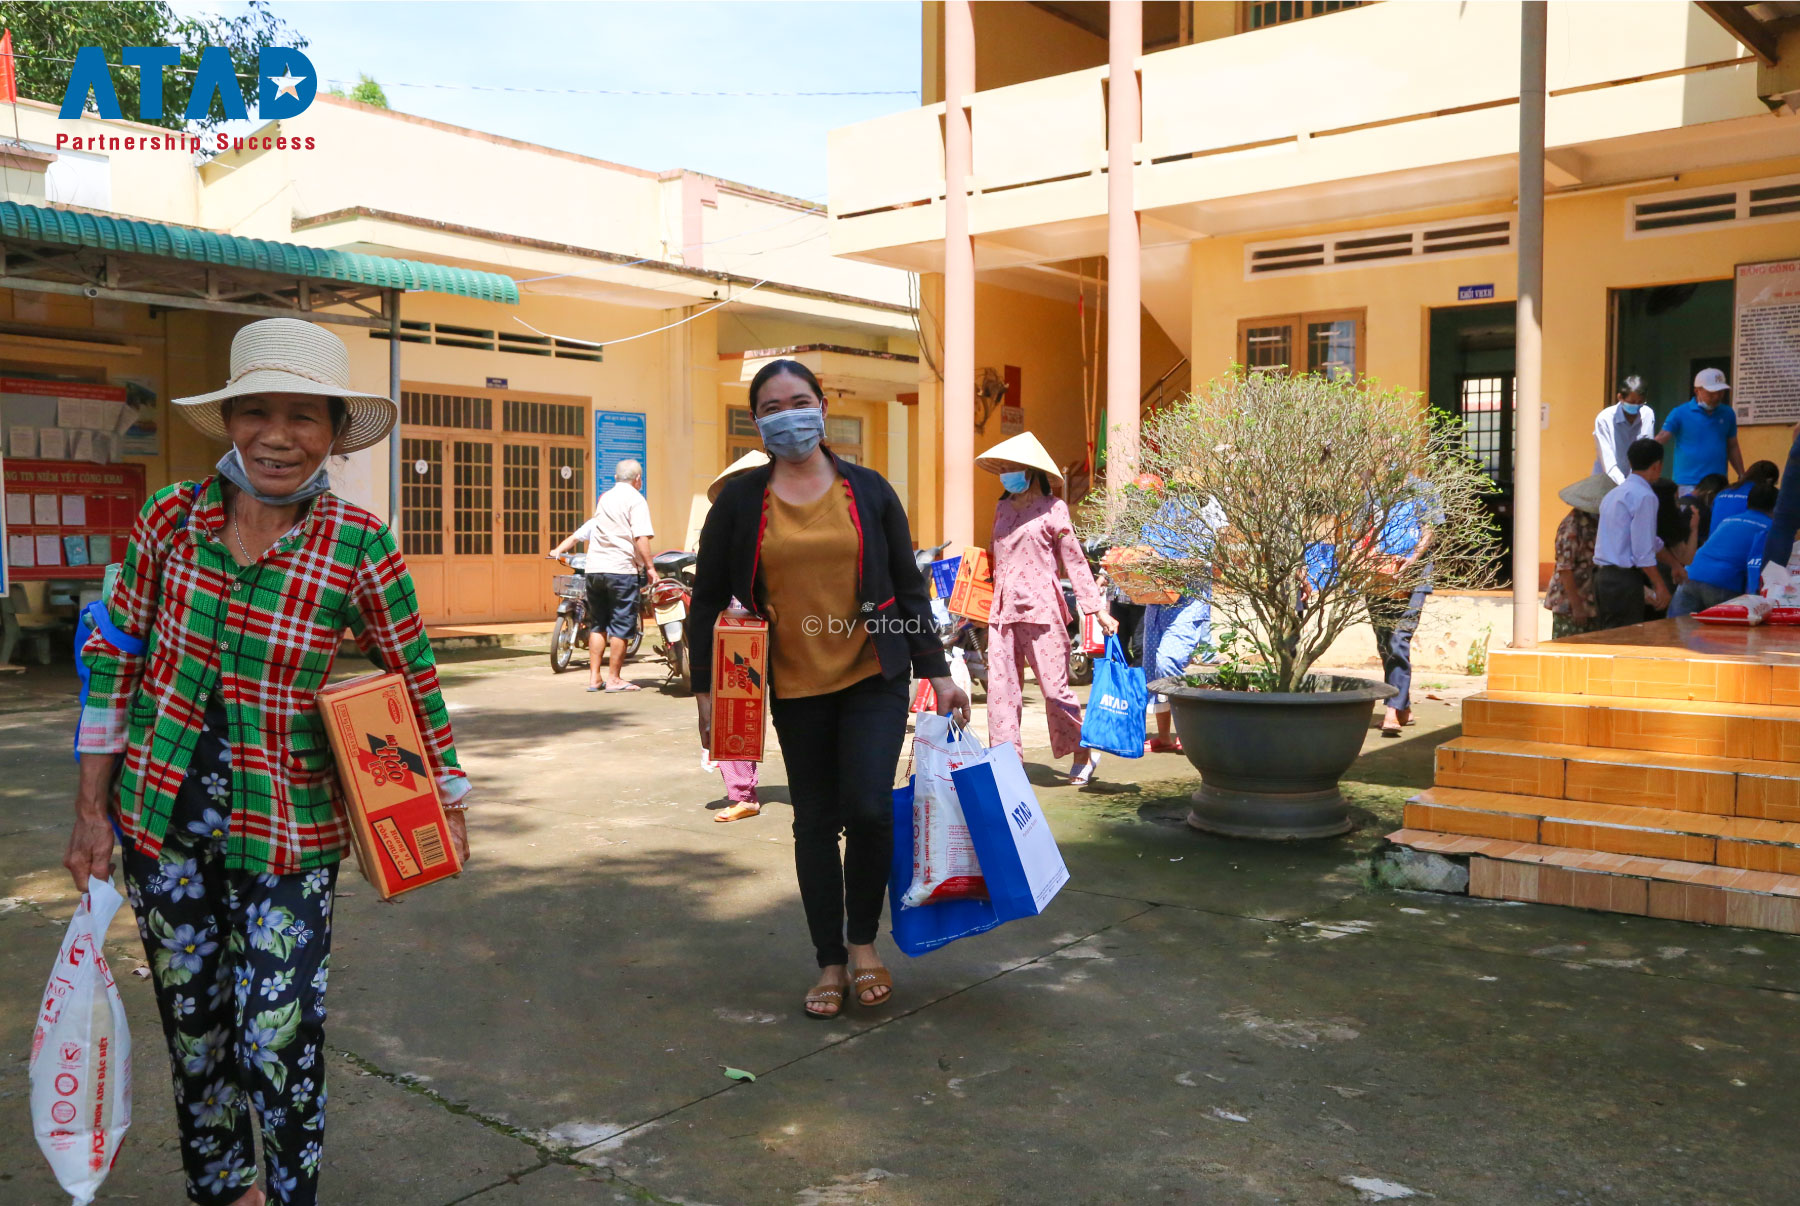 ATAD Presented Gifts For Children On International Children’s Day 1/6 & Necessities For Underprivileged Households Living In Song Nhan Village, Dong Nai Province 10